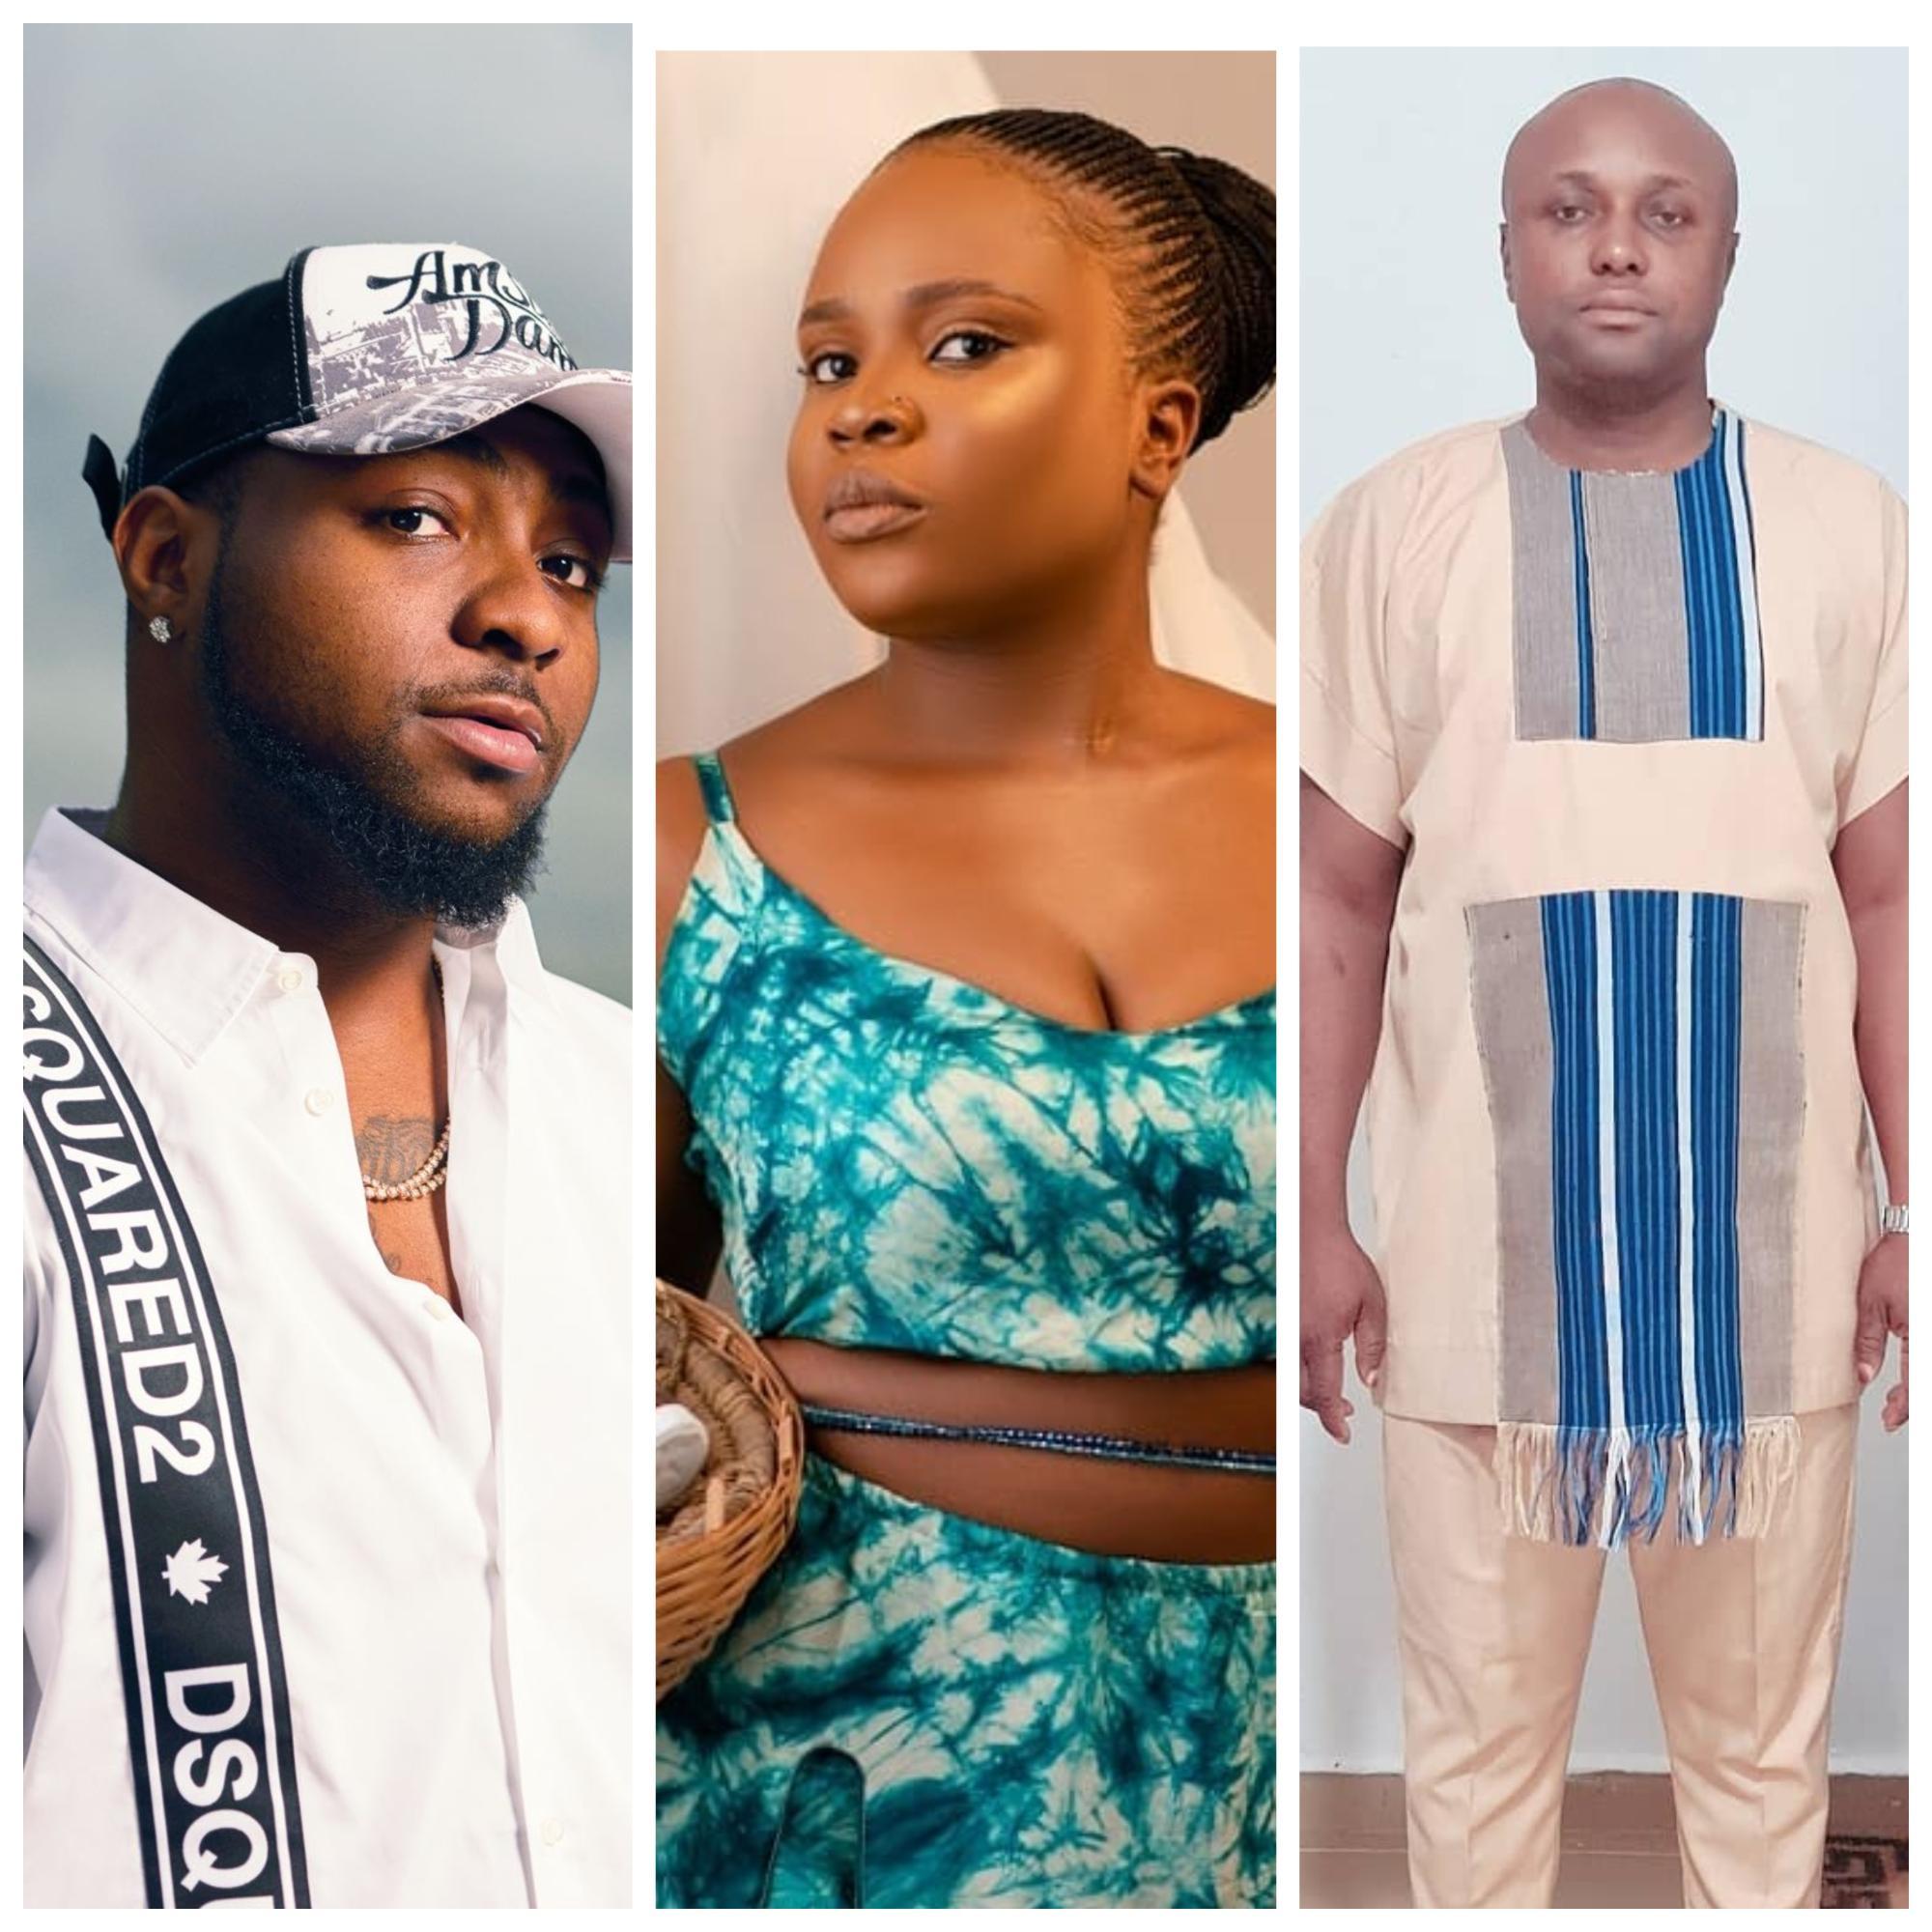 Davido refunds N800,000 to online vendor after failed contract with his aide, Isreal DMW